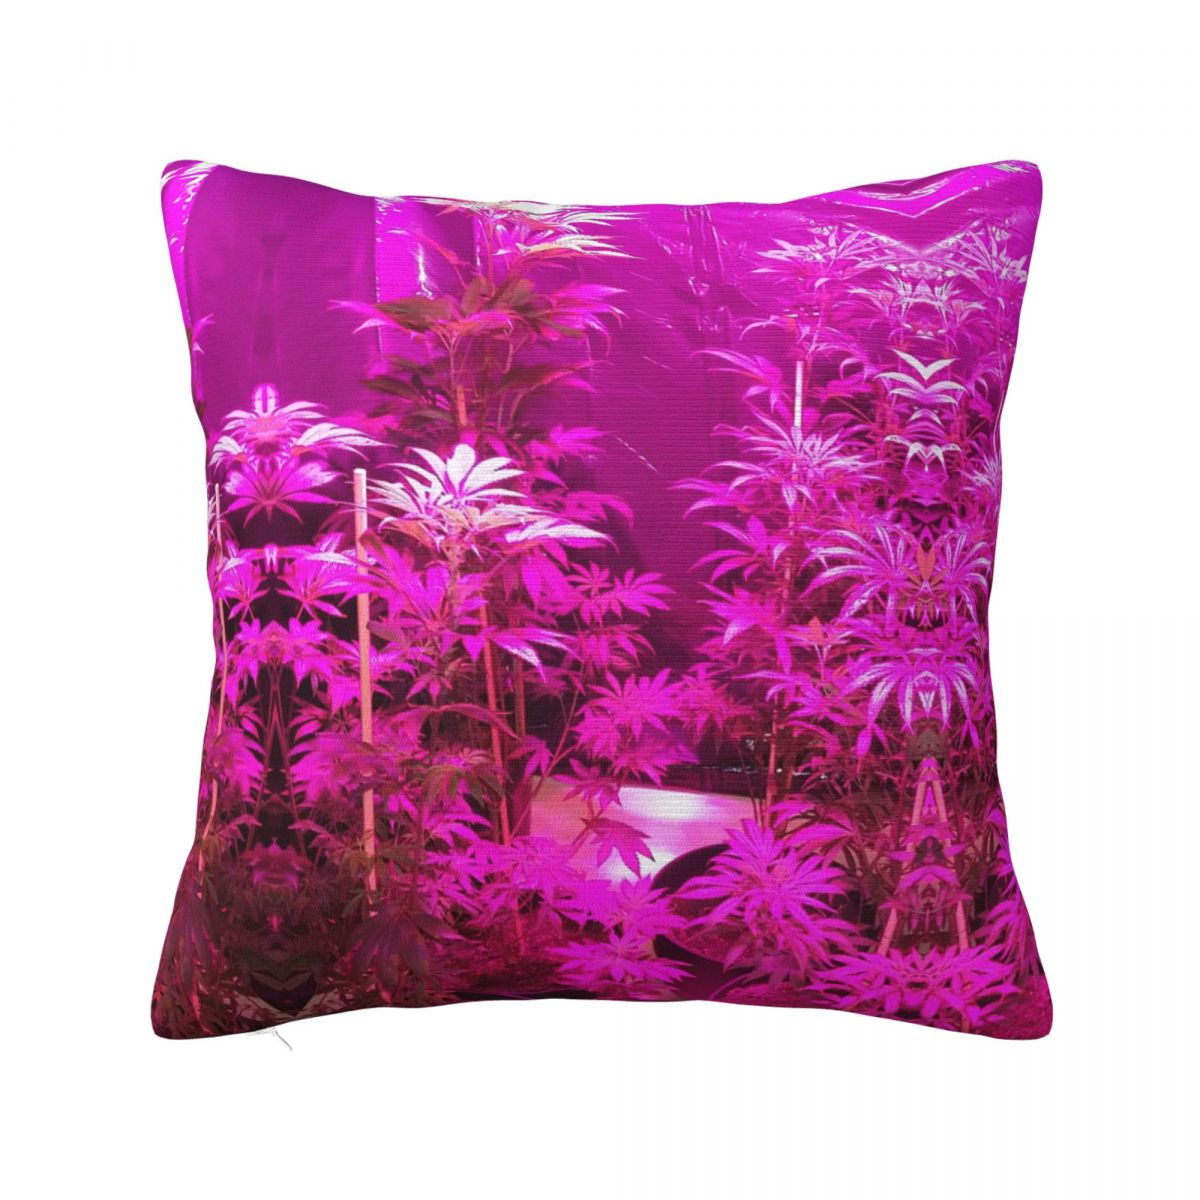 Assorted Cannabis Leaves Pillowcases